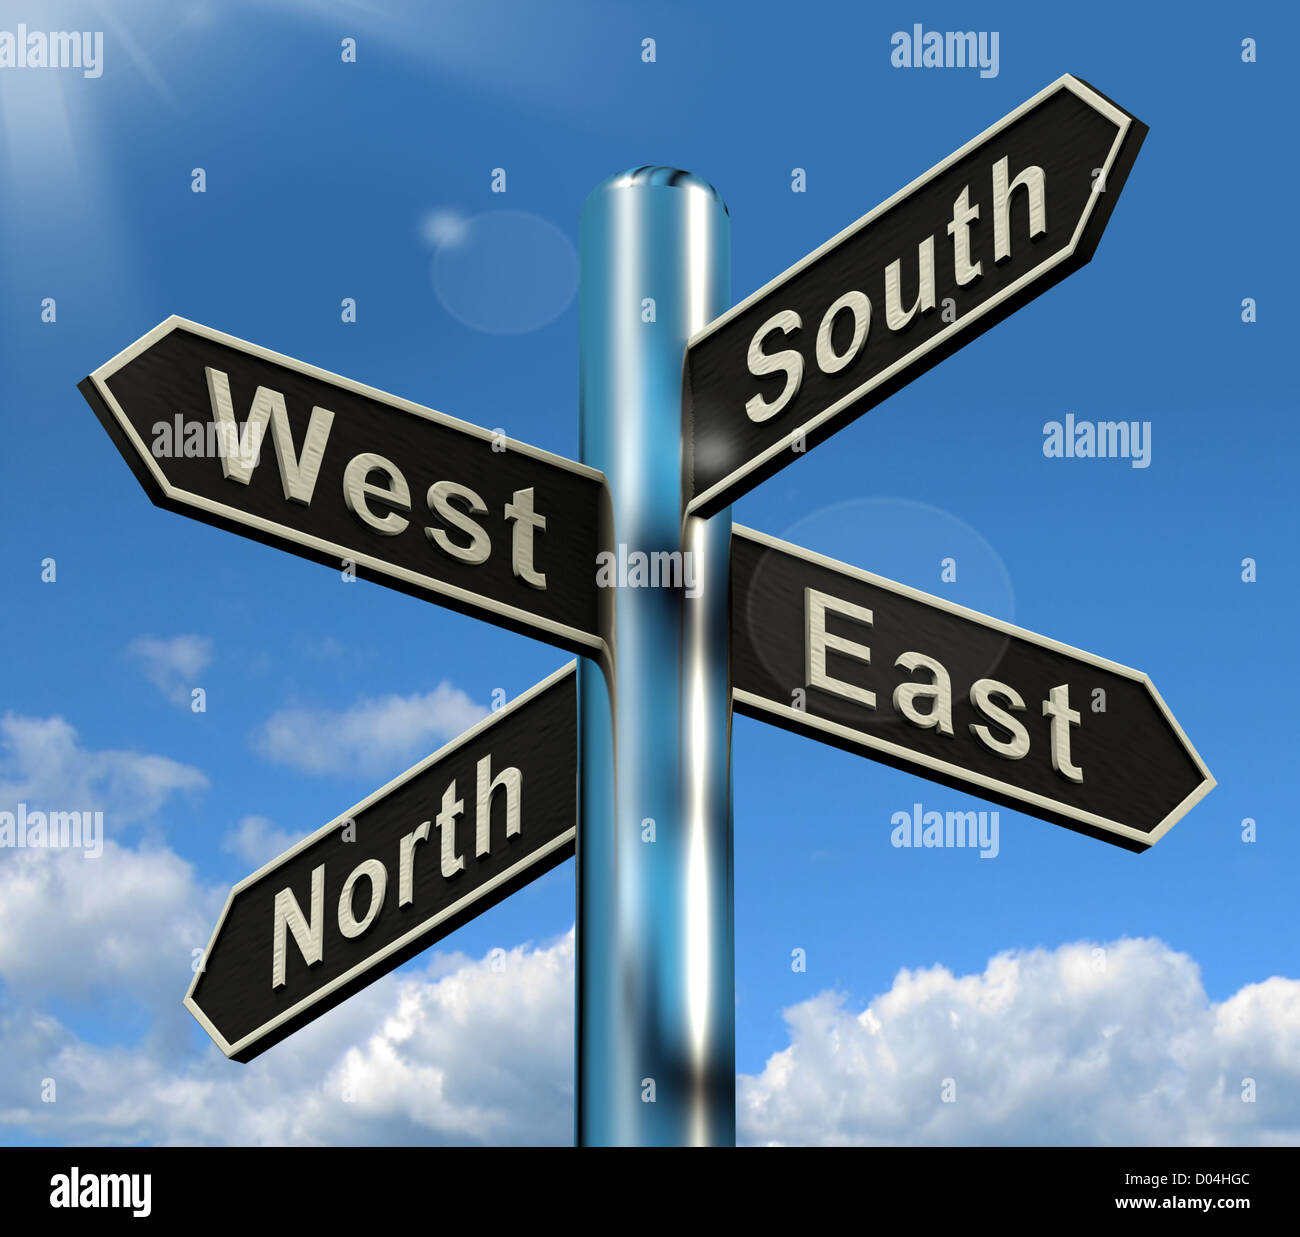 North East South West Signpost Showing Travel Or Direction Stock Photo